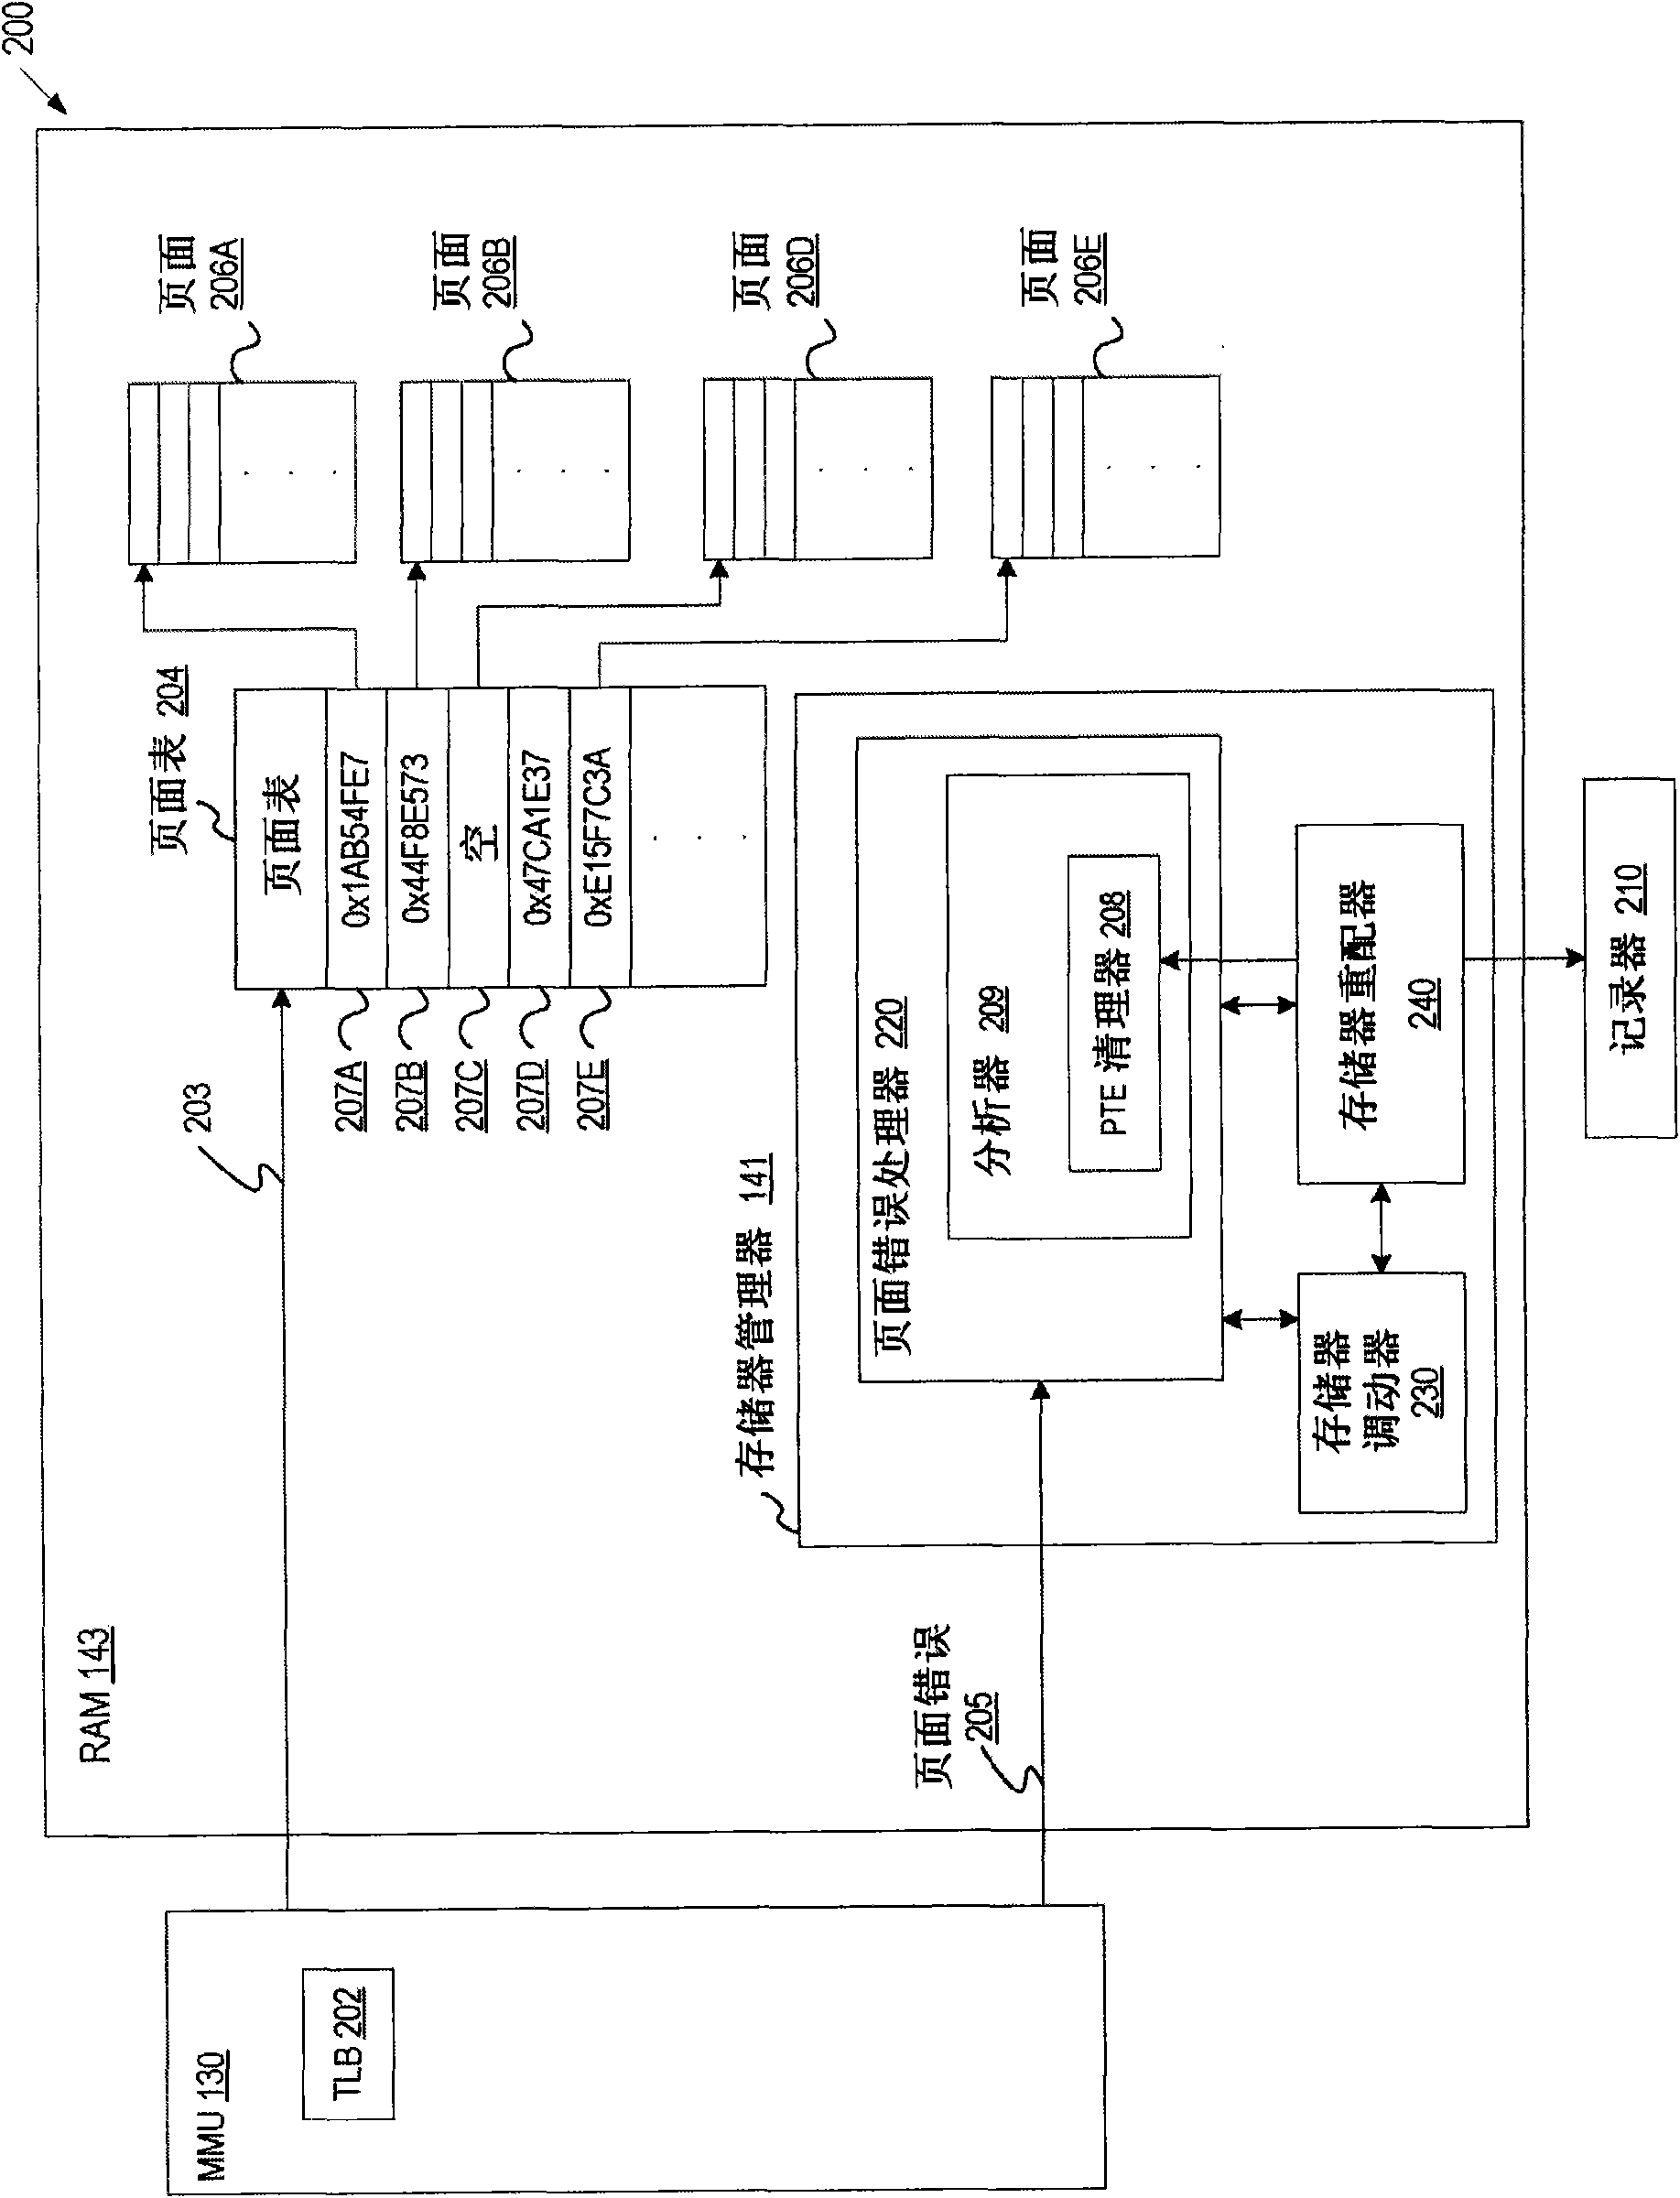 Method and apparatus to profile RAM memory objects for displacement with nonvolatile memory